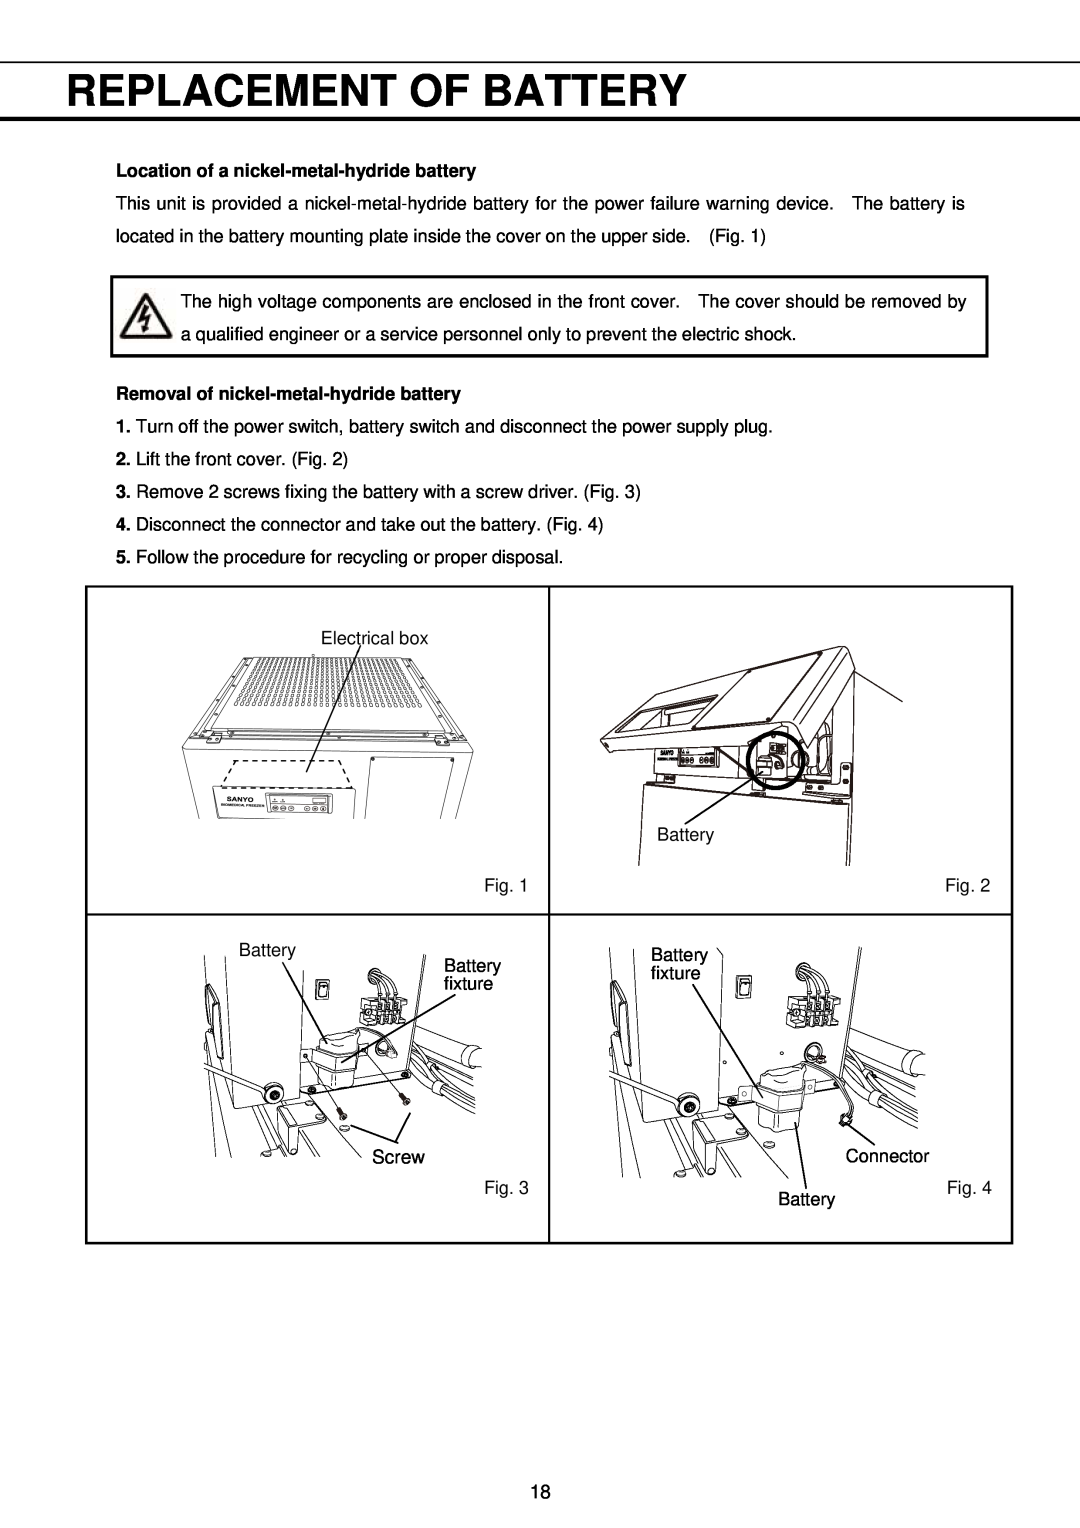 Sanyo MDF-U730M instruction manual Replacement Of Battery, Screw, Location of a nickel-metal-hydride battery 